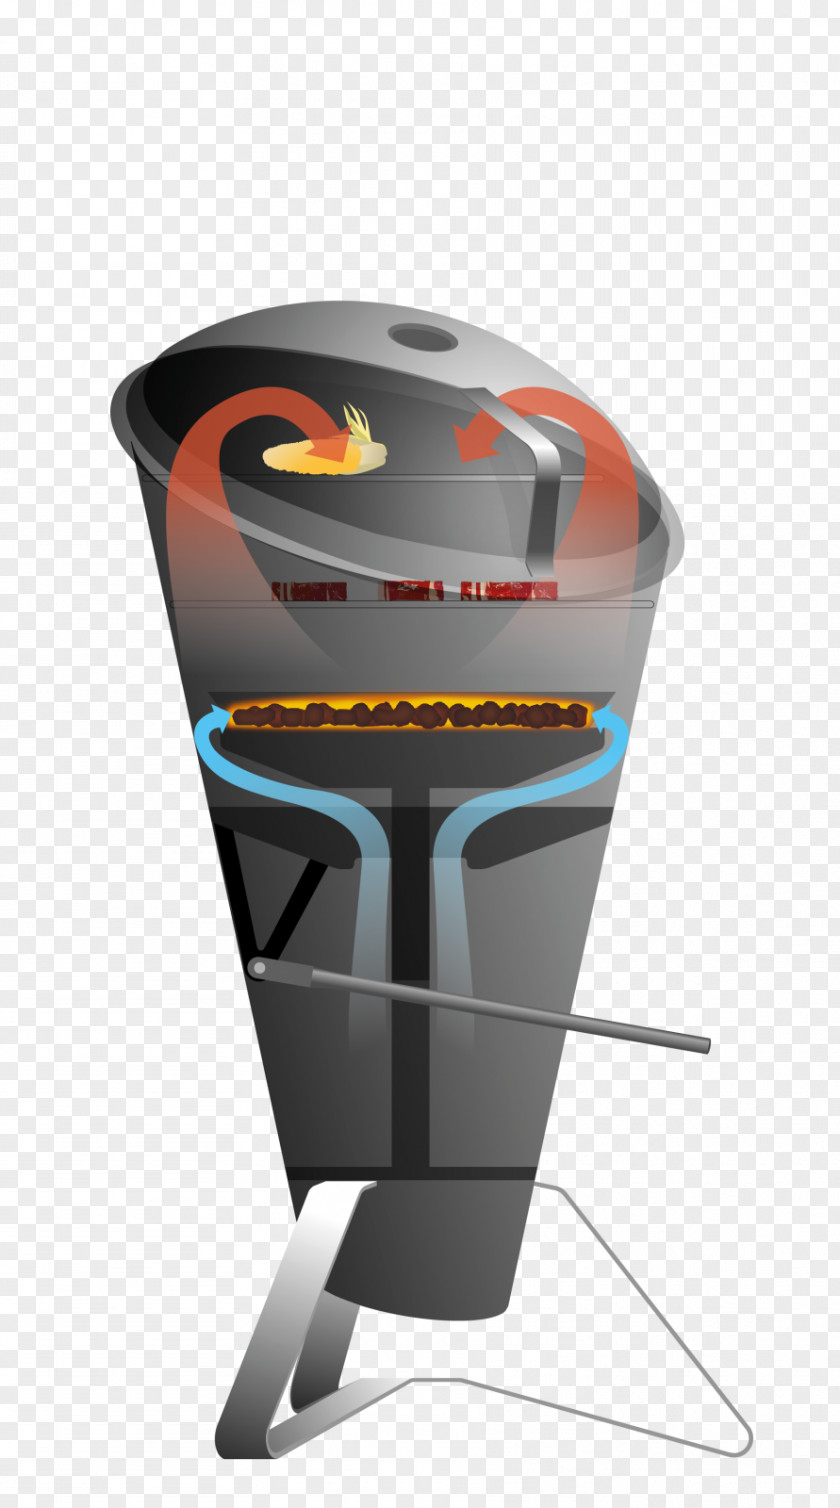 Outdoor Grill Barbecue Höfats Holzkohle Cone Schwarz Grilling Einbau Inklusive Ring Cube Fire Basket PNG